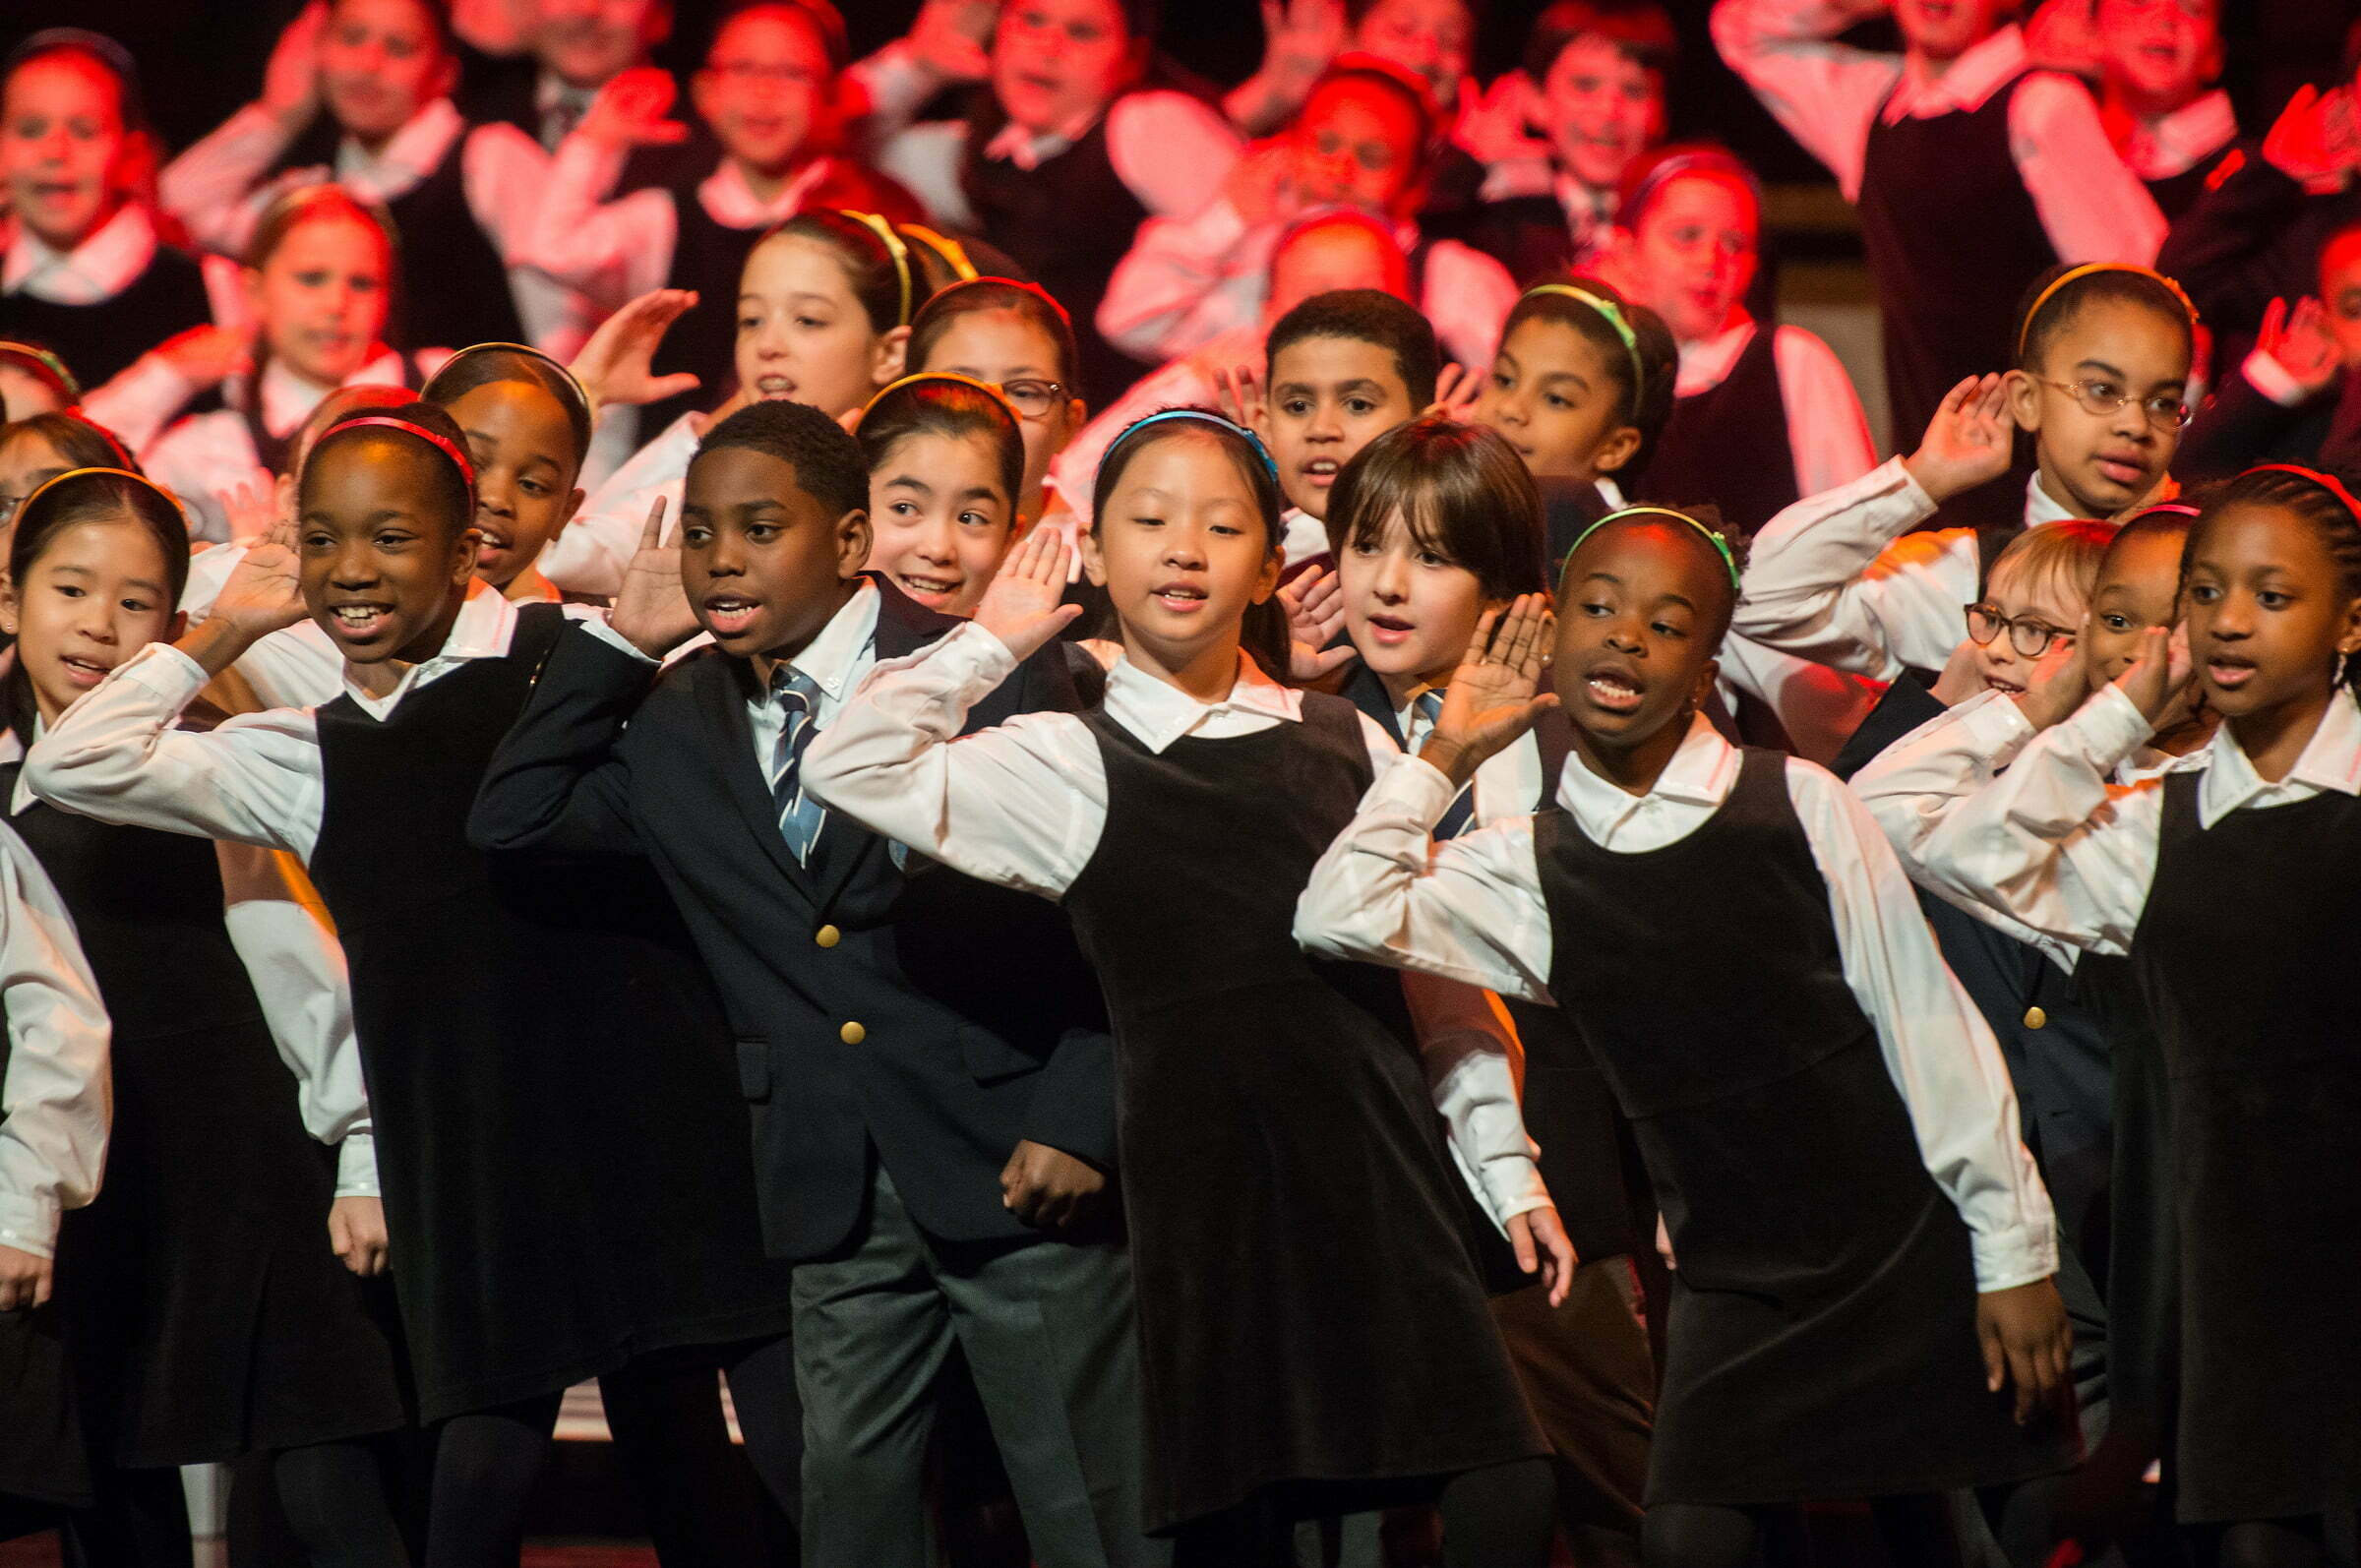 Francisco Nunez conducts the Young People's Chorus and the New York Pops in their Spring Gala Concert, "LIVING IT!"
at Jazz at Lincoln Center with special guests, BeBe Winans, Dorinda Clark-Cole, Hezekiah Walker, and the New York Pops on March 7, 2016.
Corportate honoree: Steve Kuhn
Photo Credit: ©Stephanie Berger